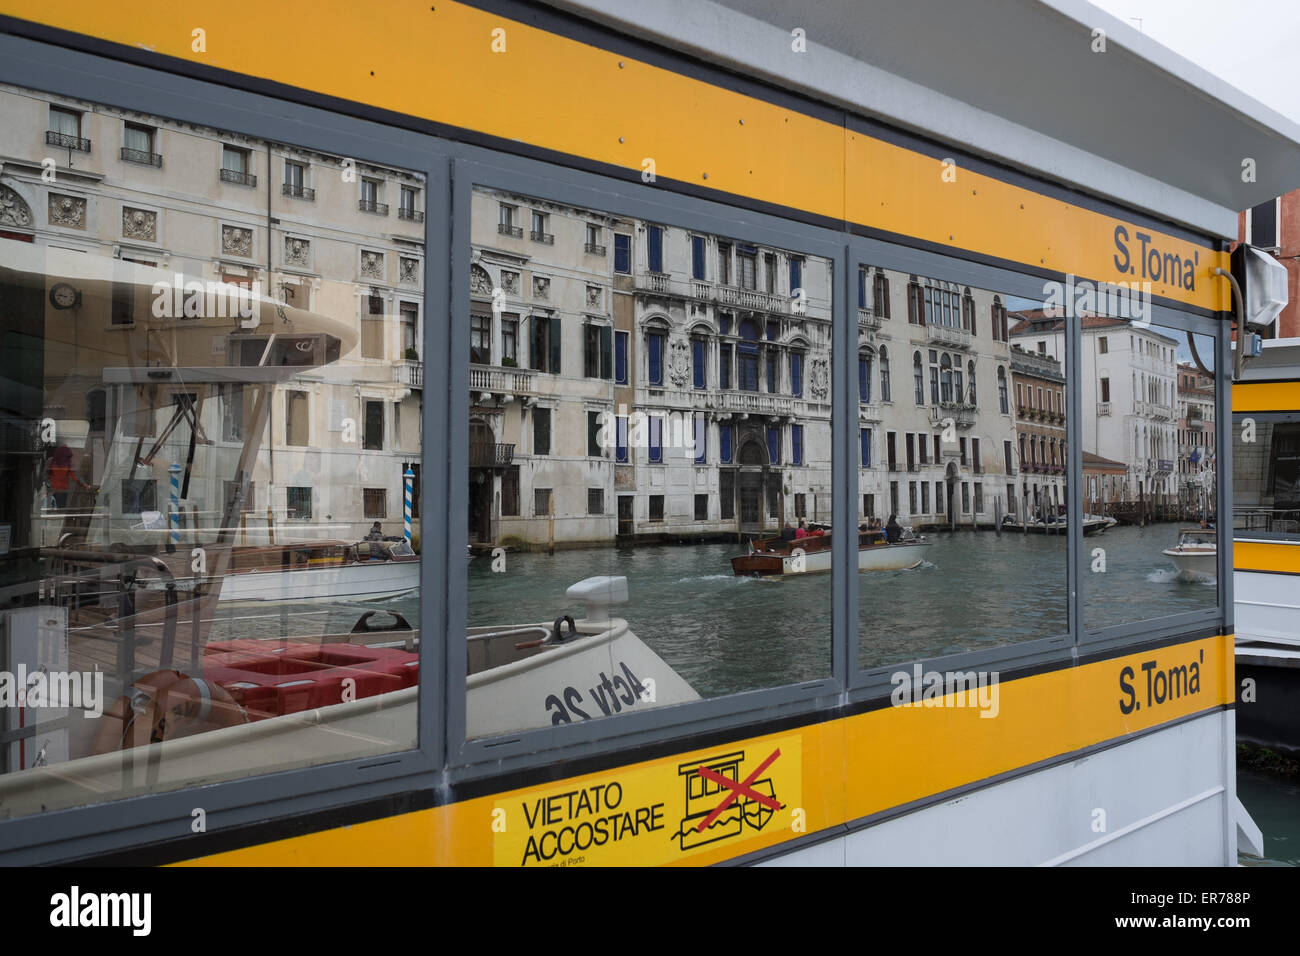 Vaporetto and water taxis on the Grand Canal in Venice Italy. Stock Photo